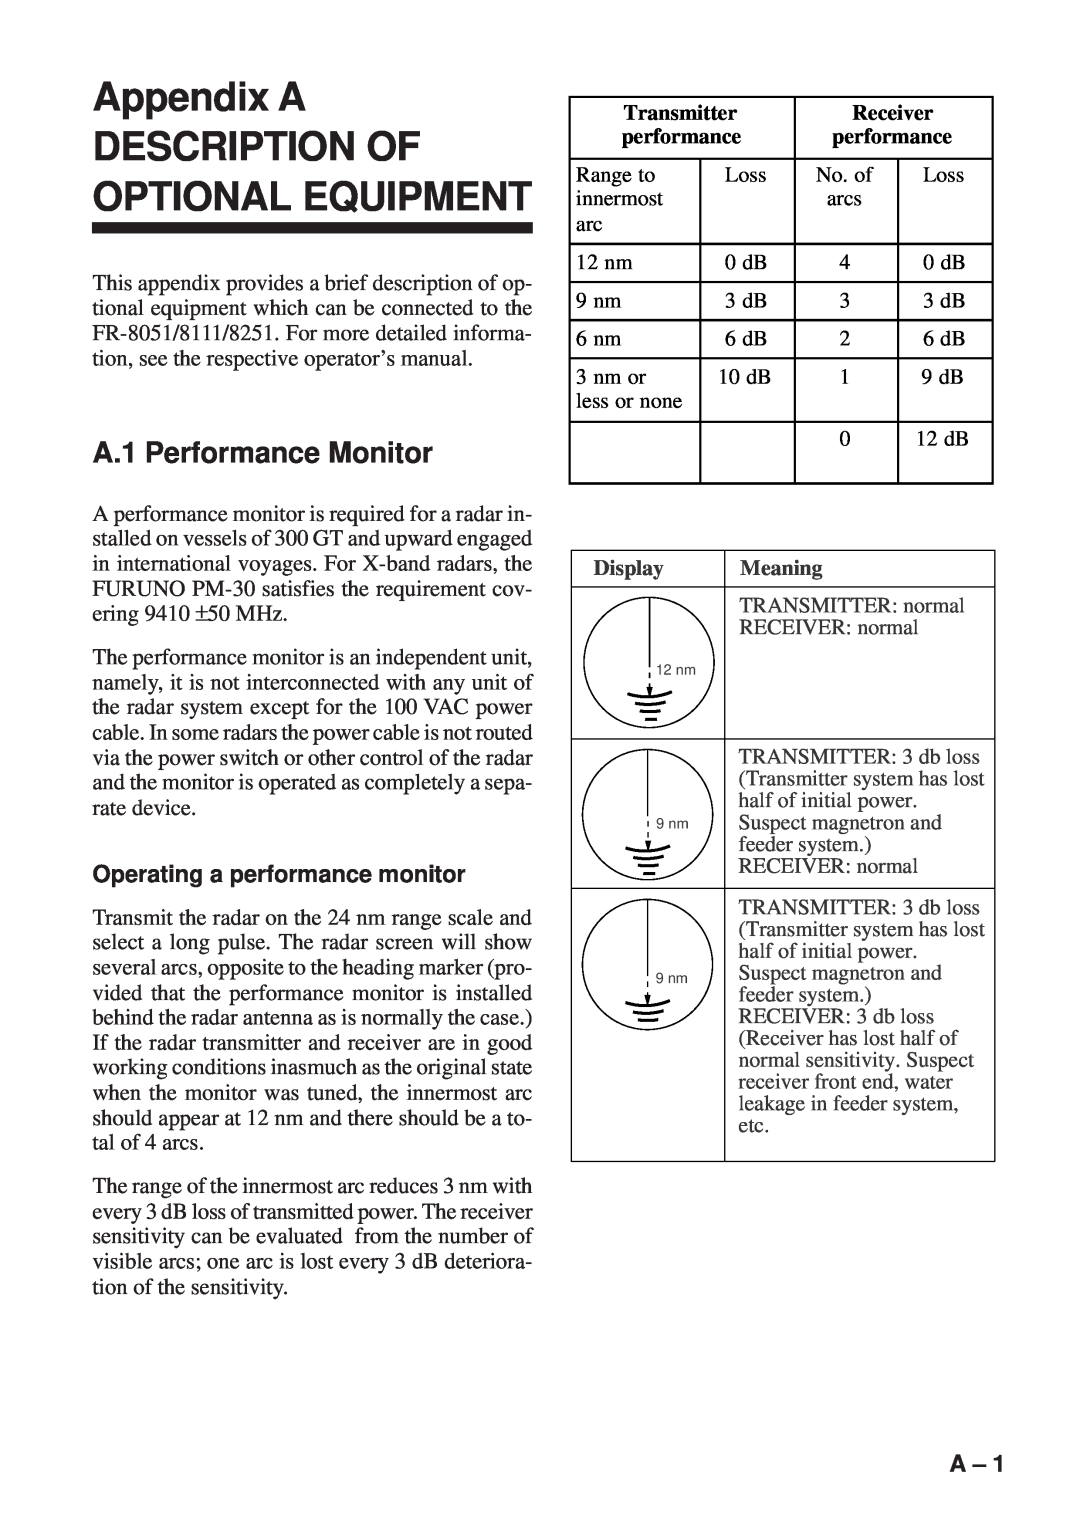 Furuno FR-8111 Appendix A DESCRIPTION OF OPTIONAL EQUIPMENT, A.1 Performance Monitor, Operating a performance monitor 